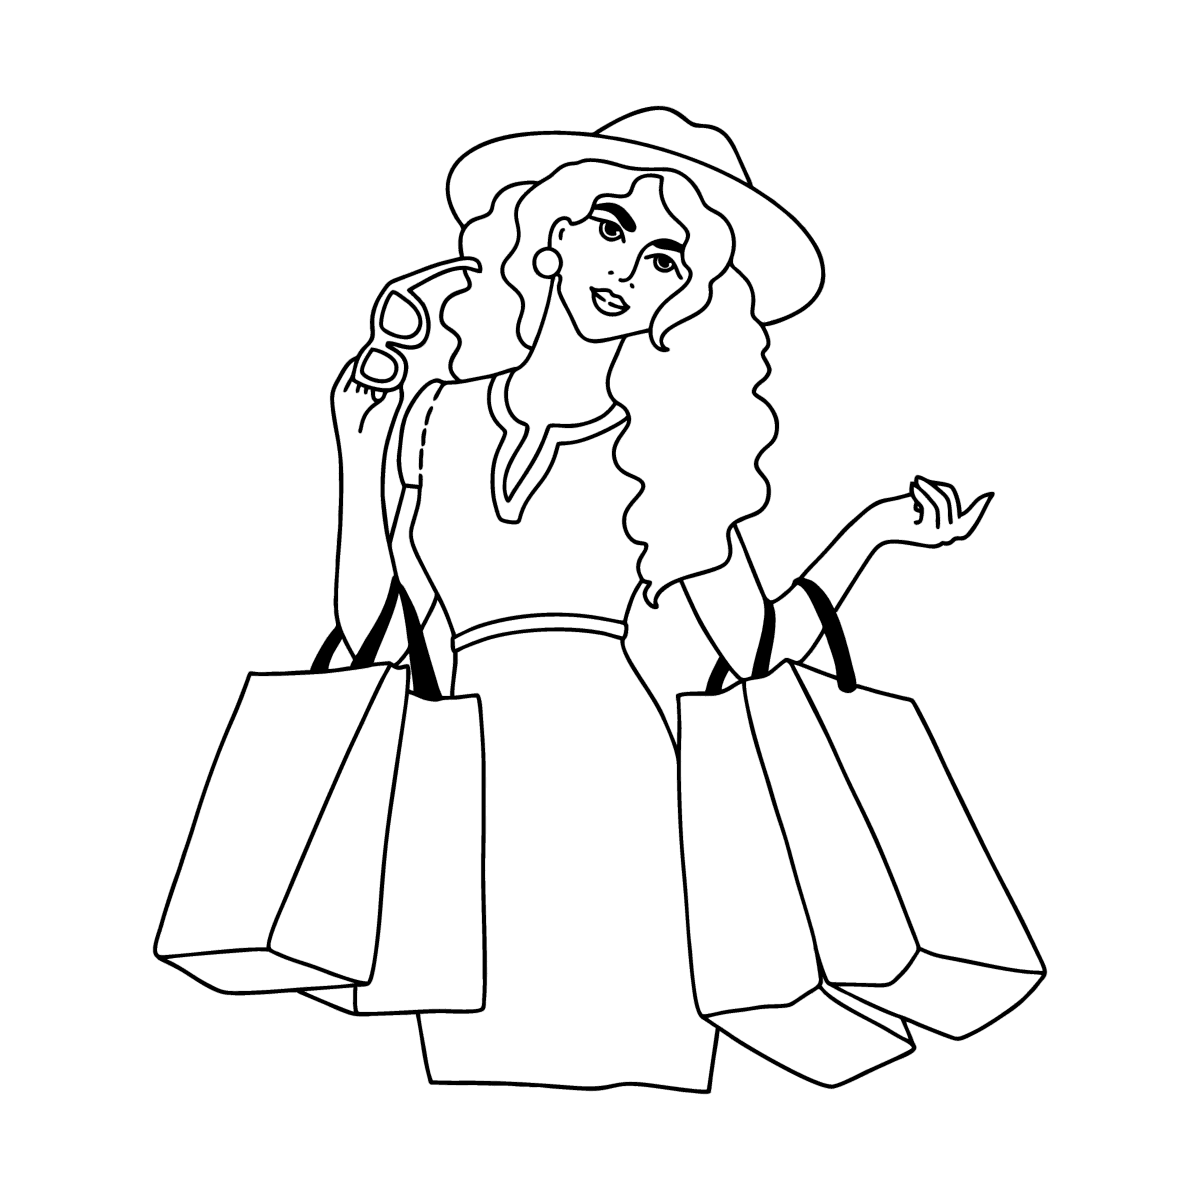 Modern woman - Woman coloring pages for Adults Print and Online